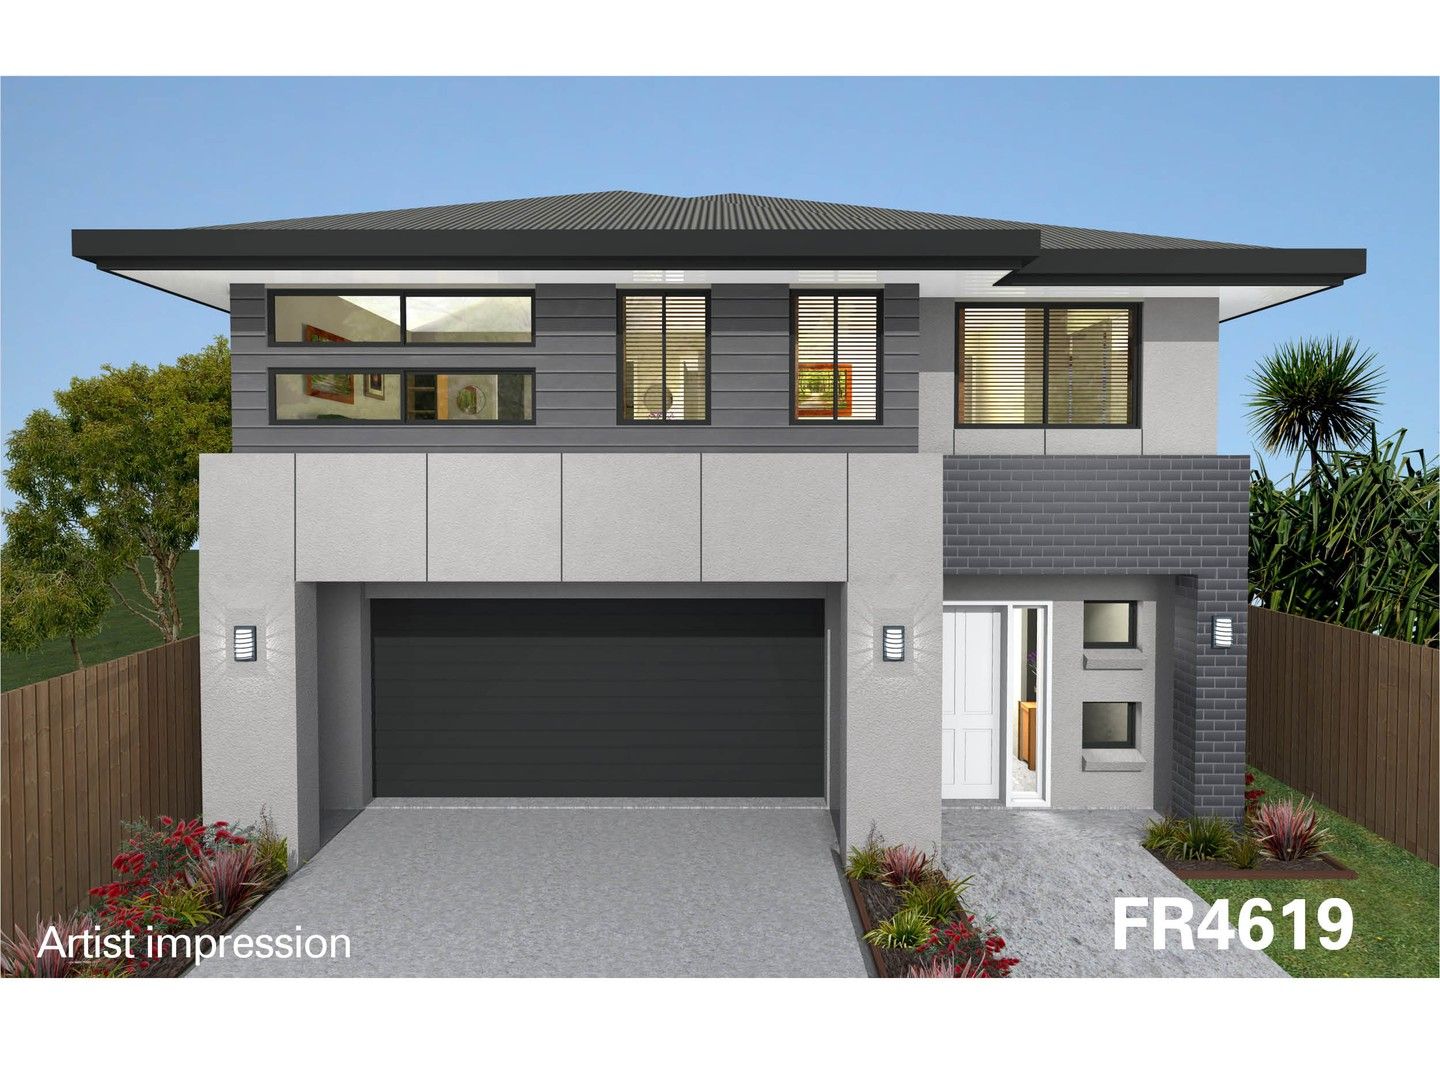 4 bedrooms New House & Land in Lot 161 Caldwell Pl BLACKTOWN NSW, 2148